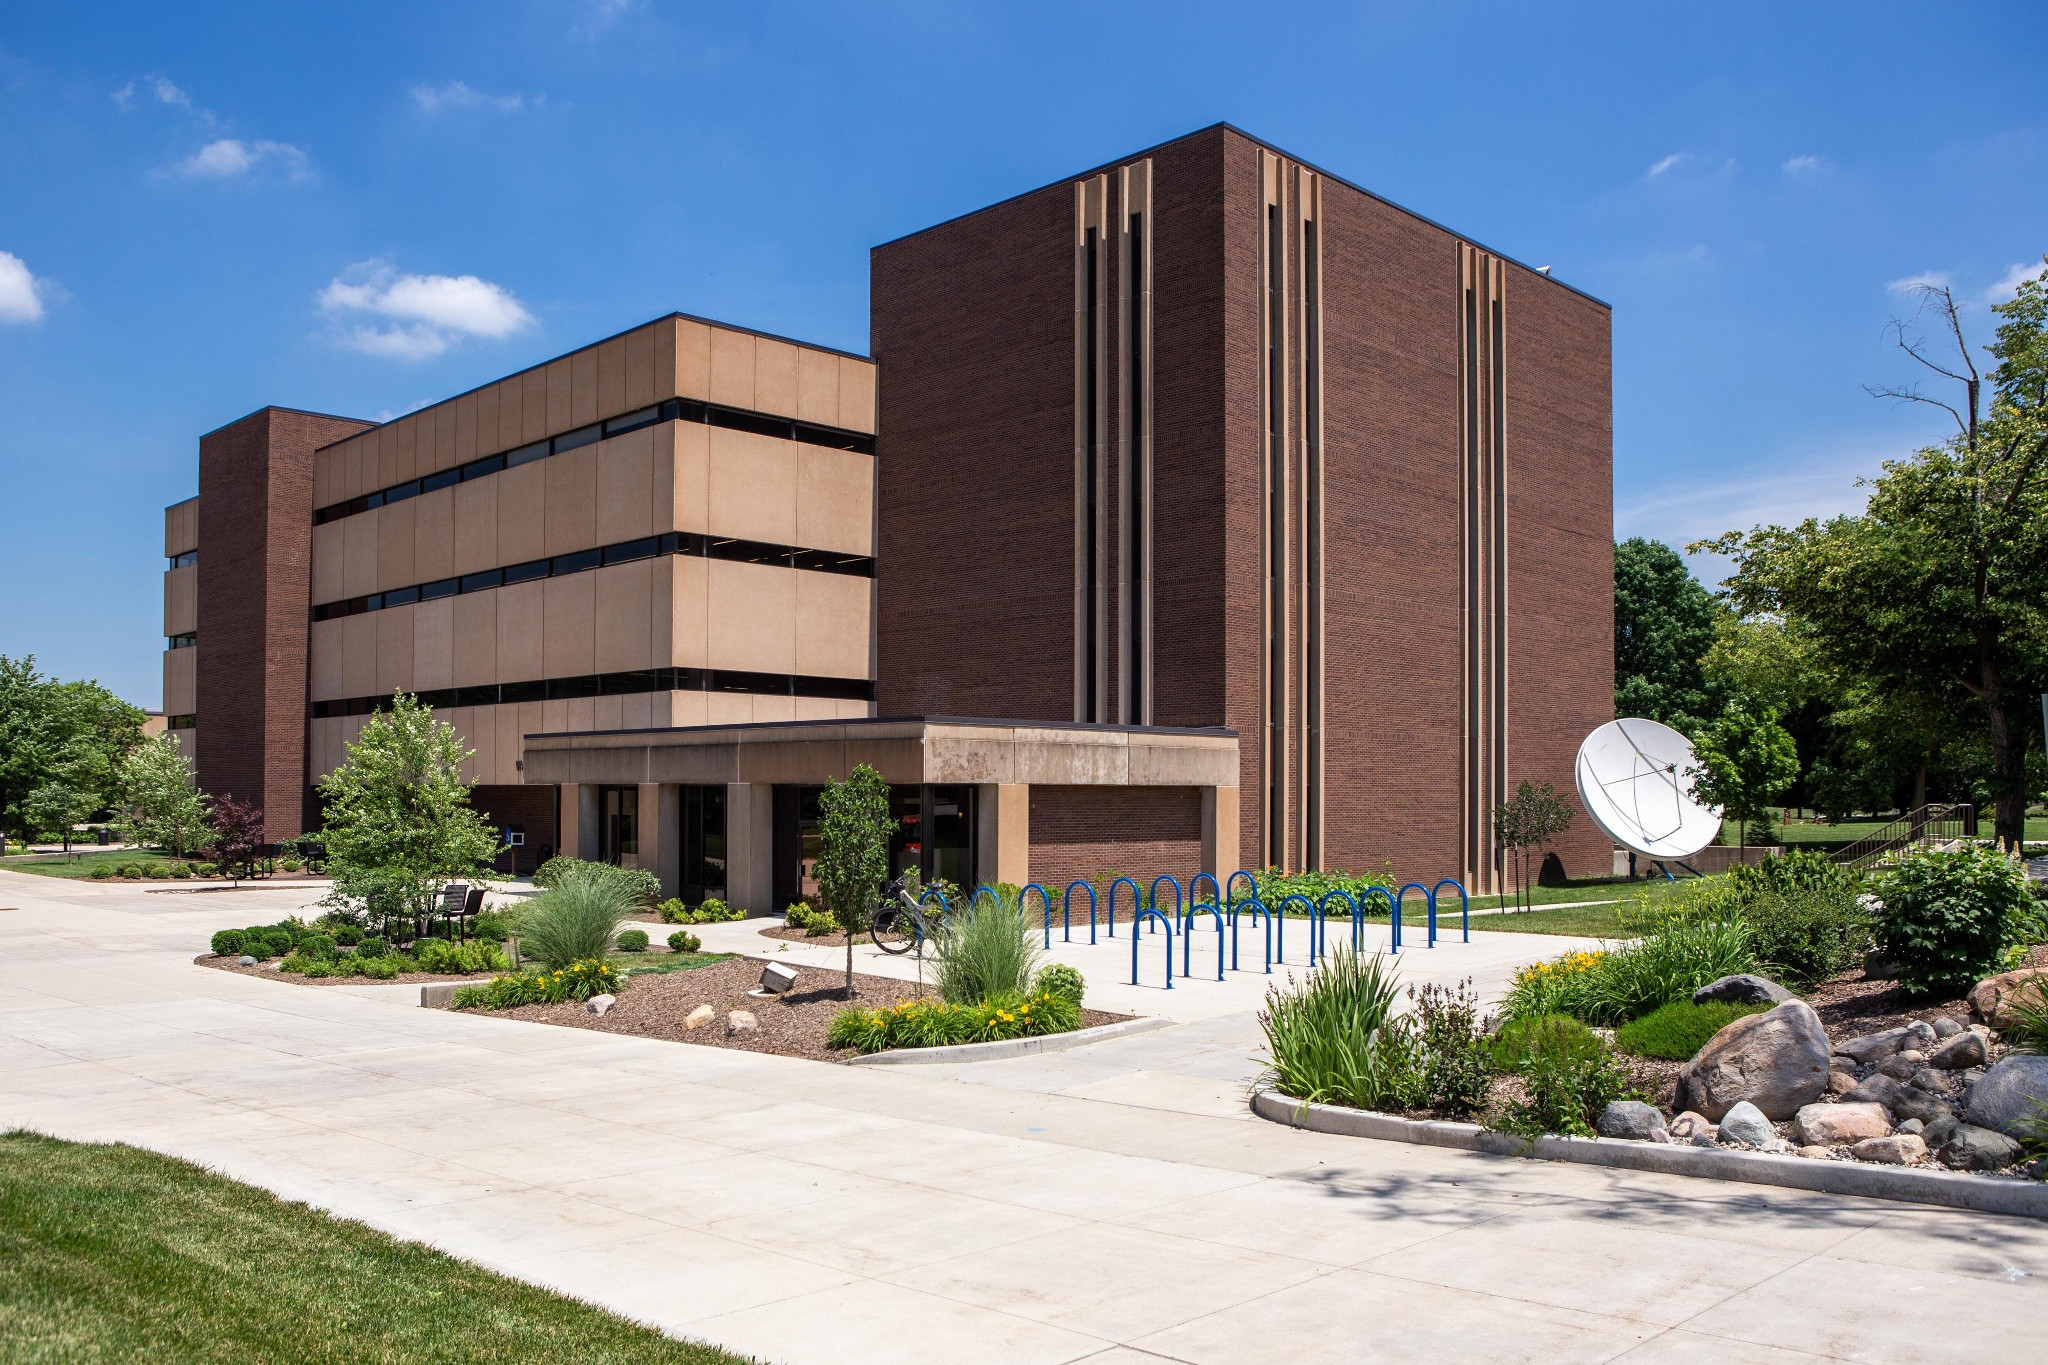 Exterior view of the Liberal Arts building at IUFW